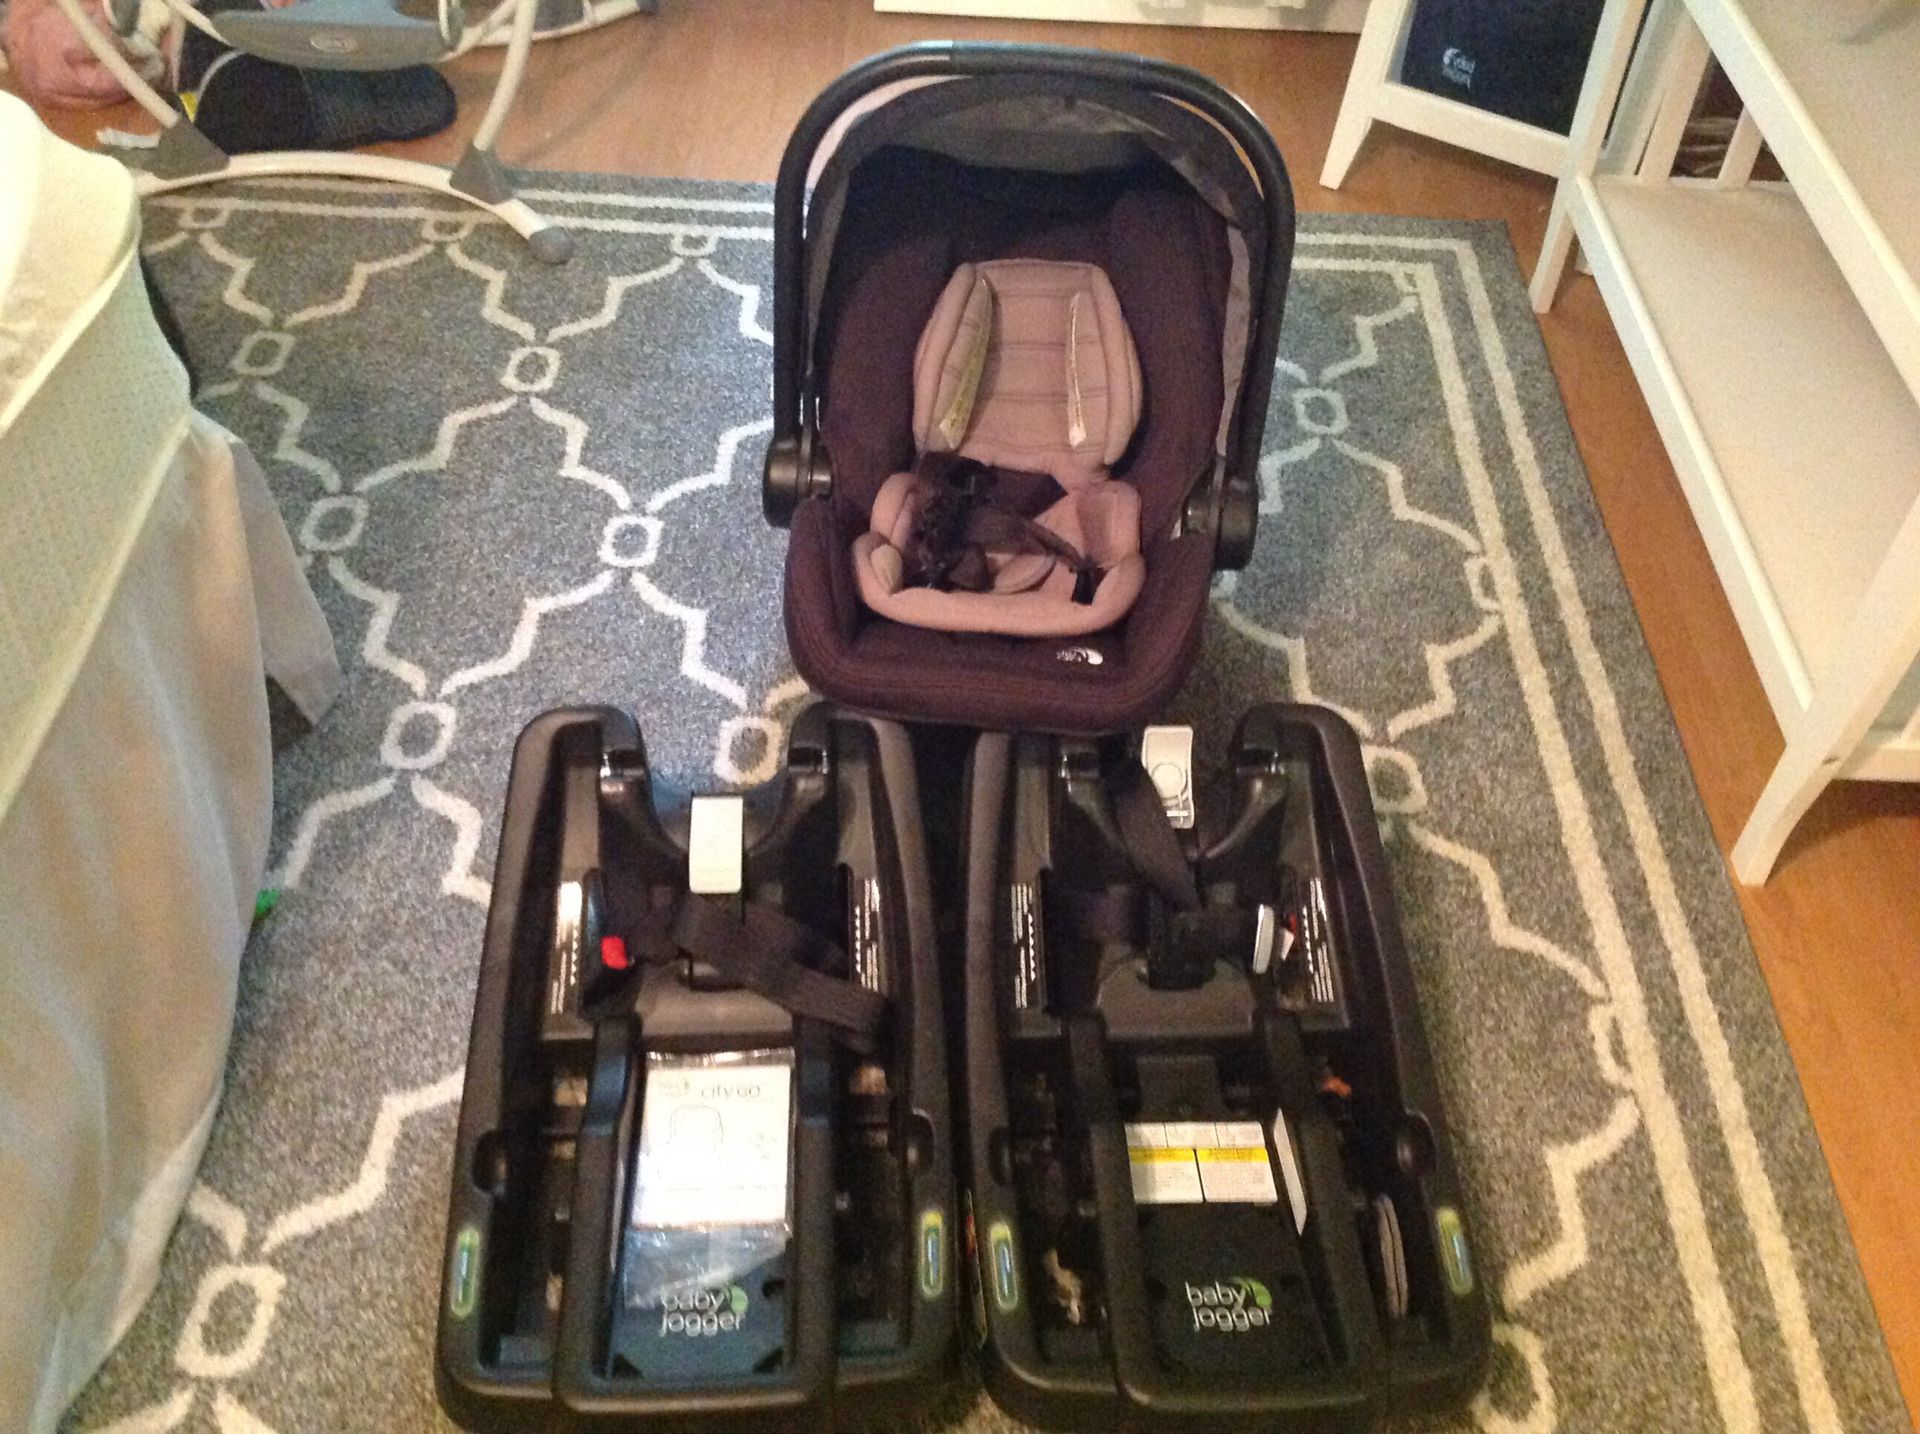 Baby Jogger City GO Infant Car Seat plus two Car Seat Bases